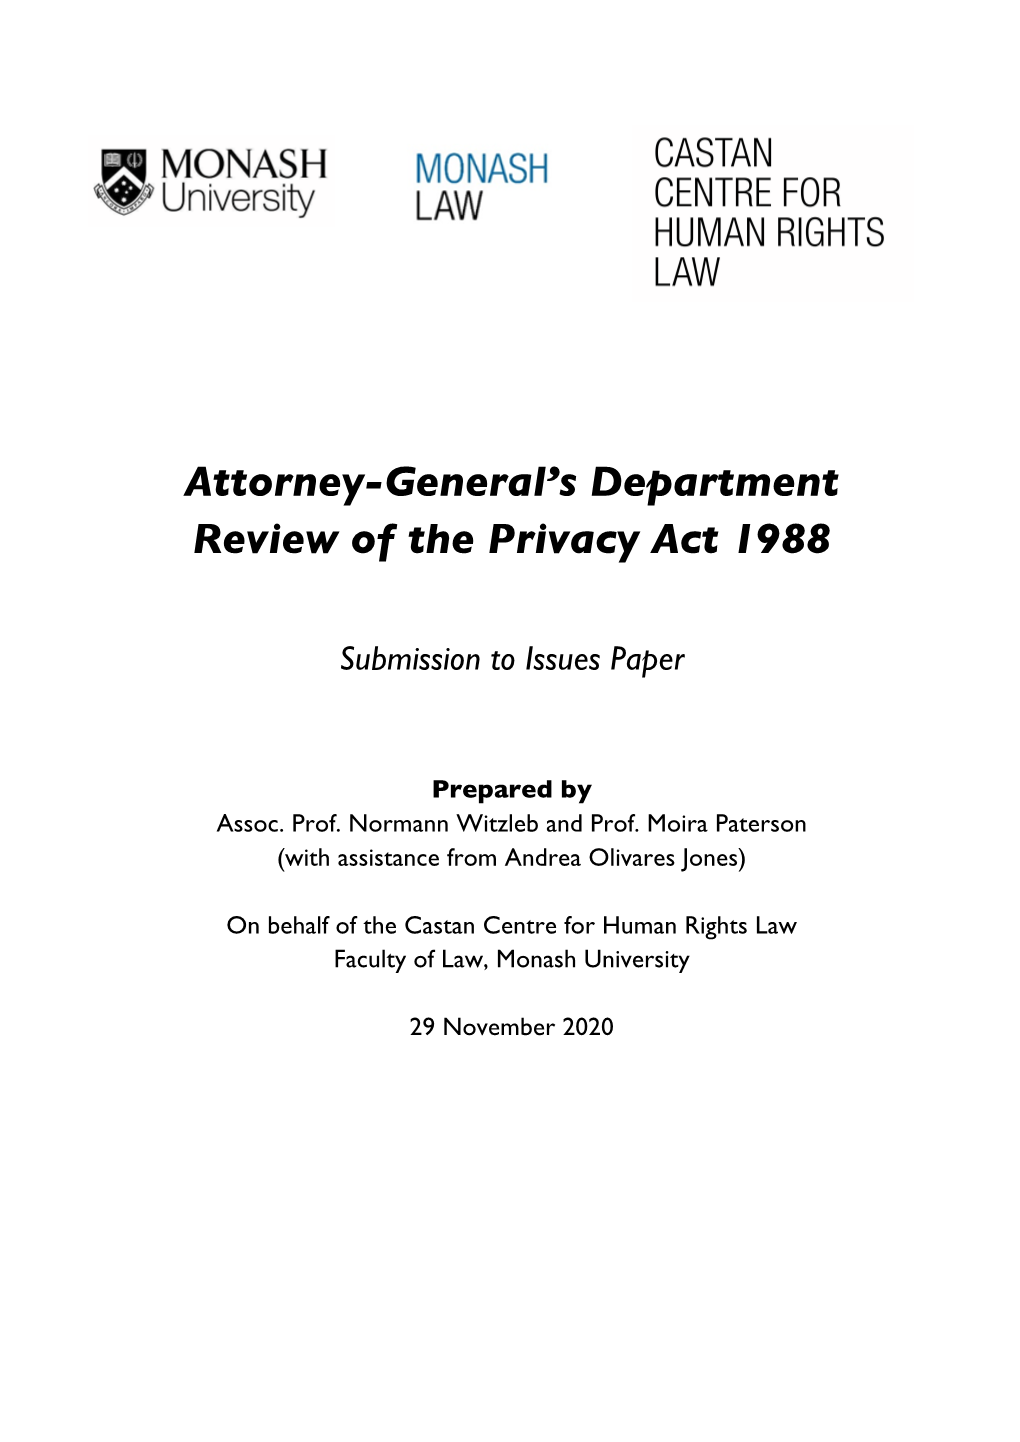 Attorney-General's Department Review of the Privacy Act 1988